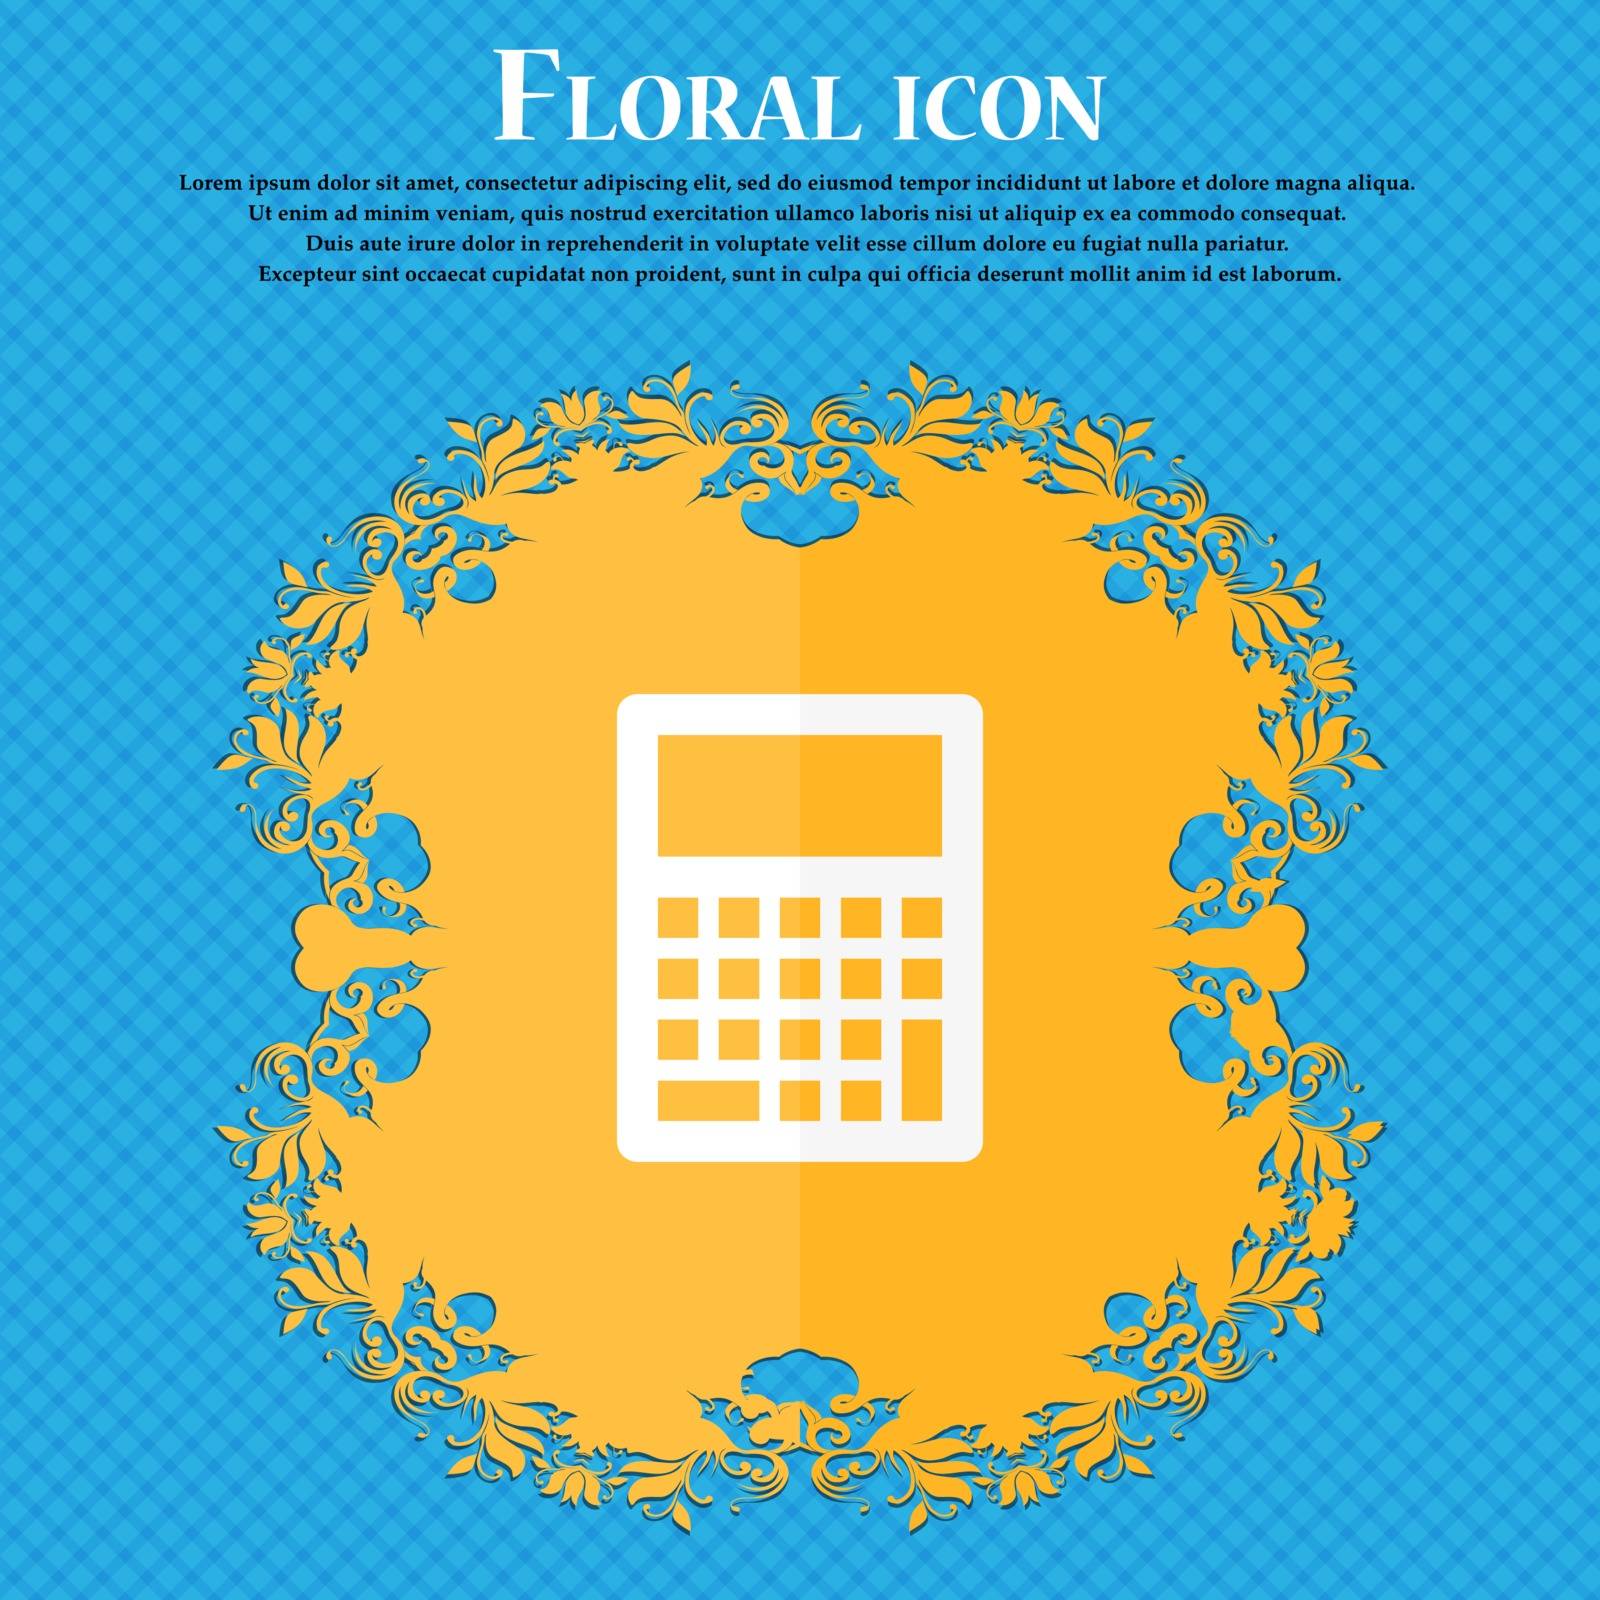 Calculator icon. Floral flat design on a blue abstract background with place for your text. Vector illustration